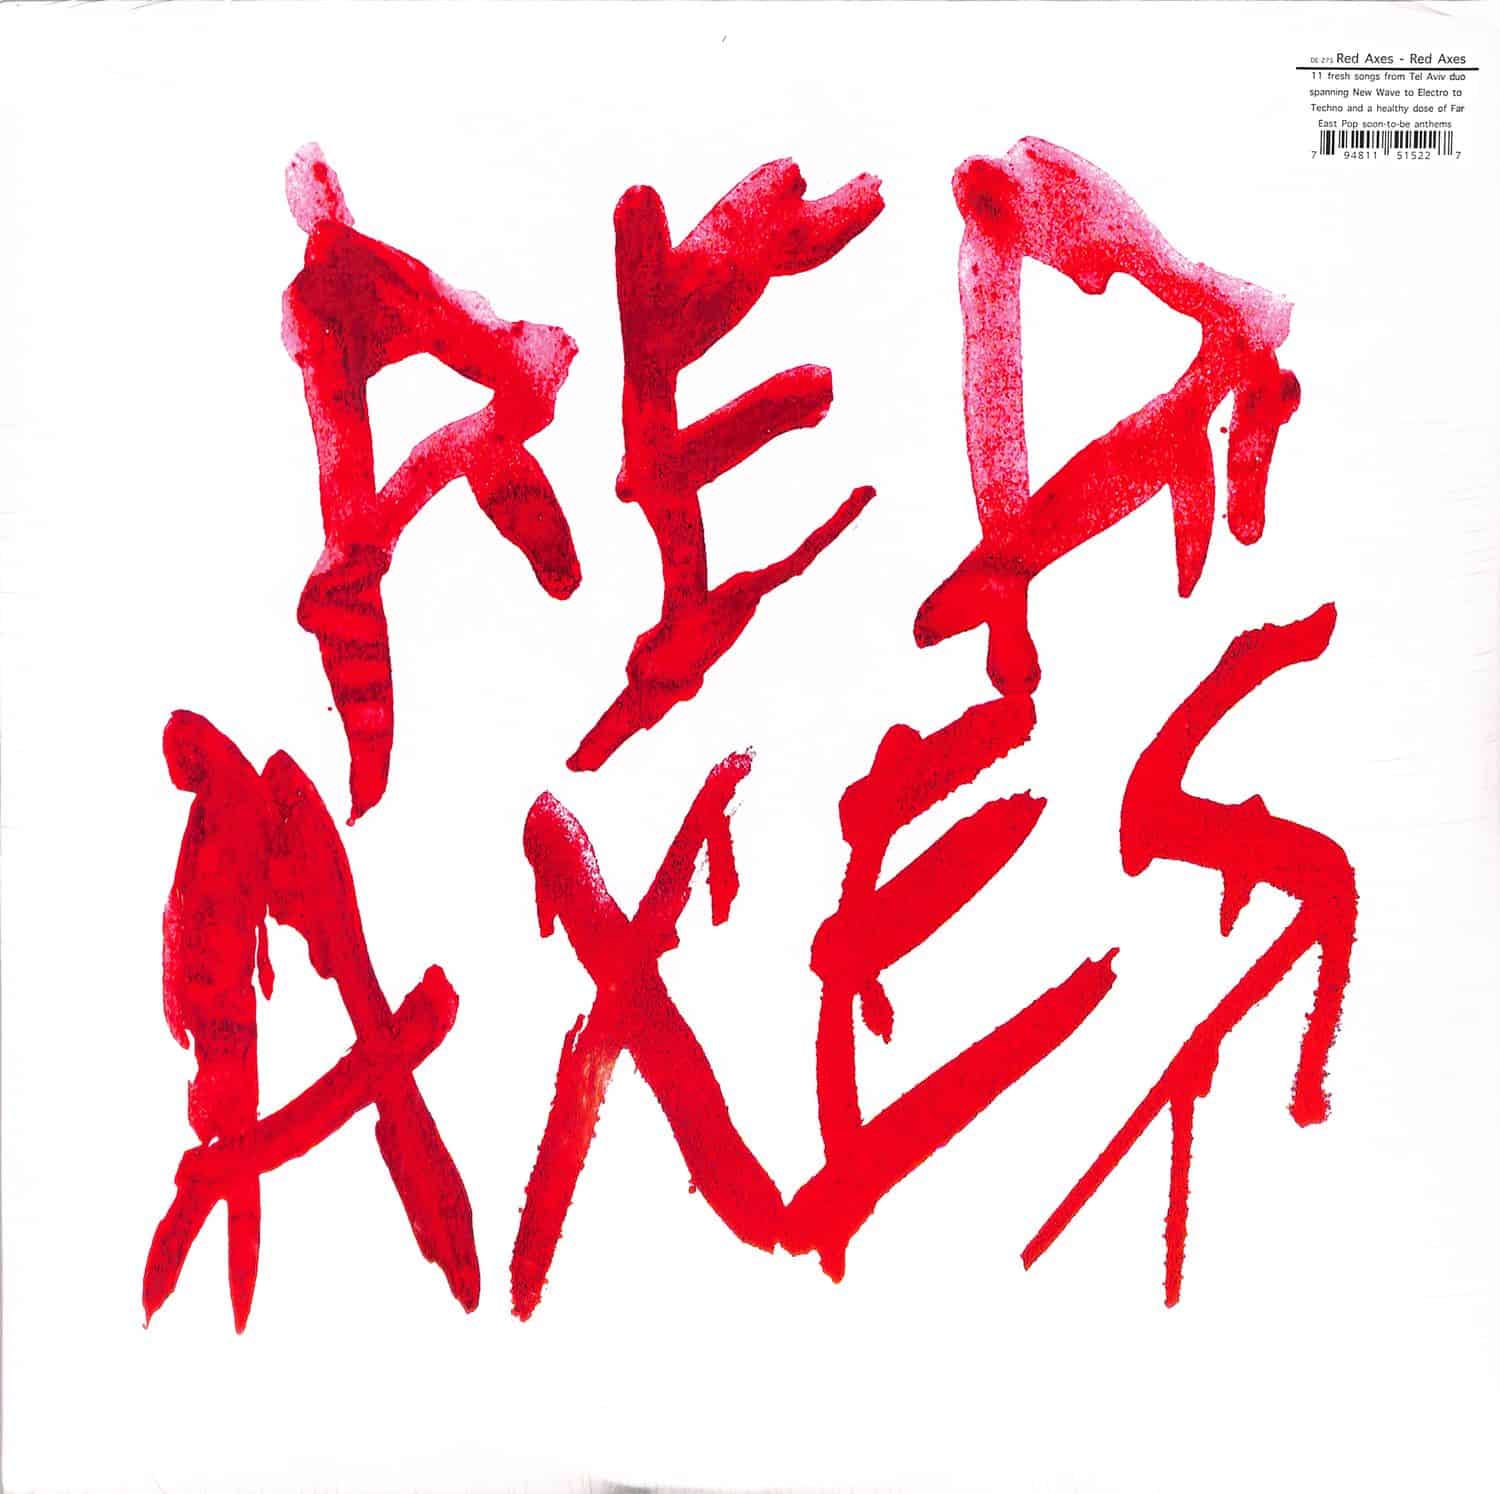 Red Axes - RED AXES 